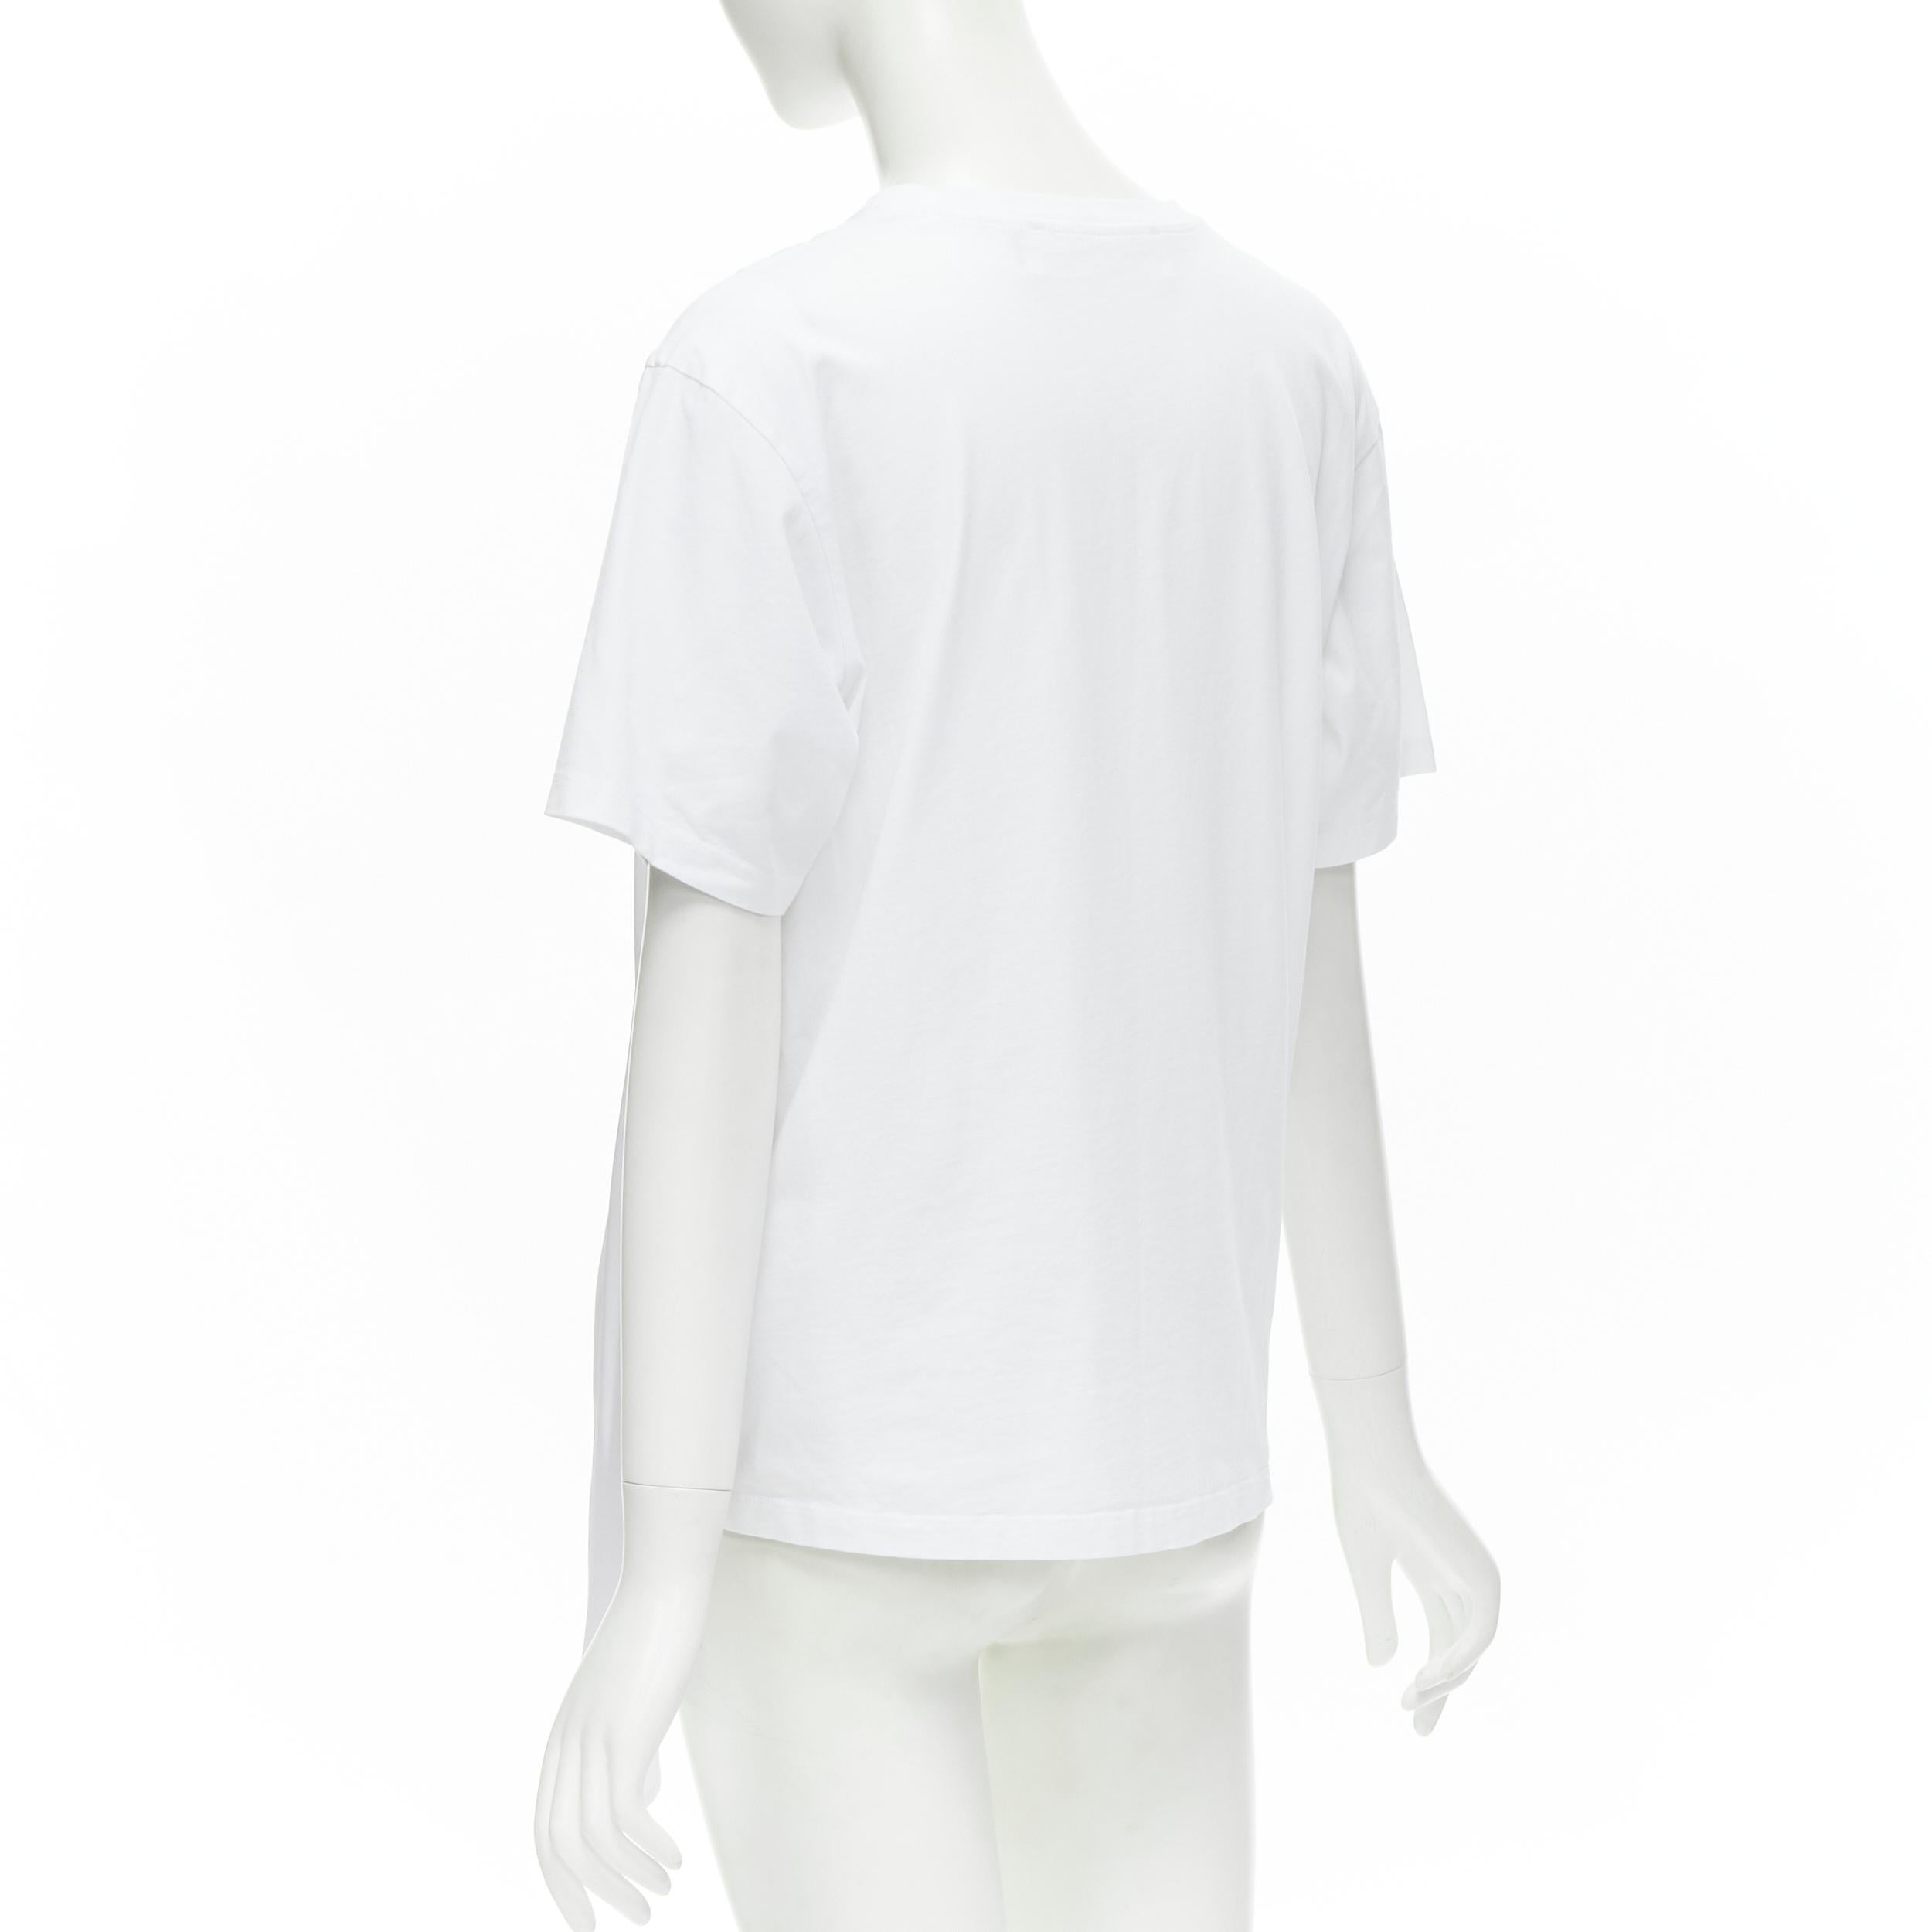 VVB VICTORIA BECKHAM 100% cotton polyester insert asymmetric t-shirt S In Excellent Condition For Sale In Hong Kong, NT